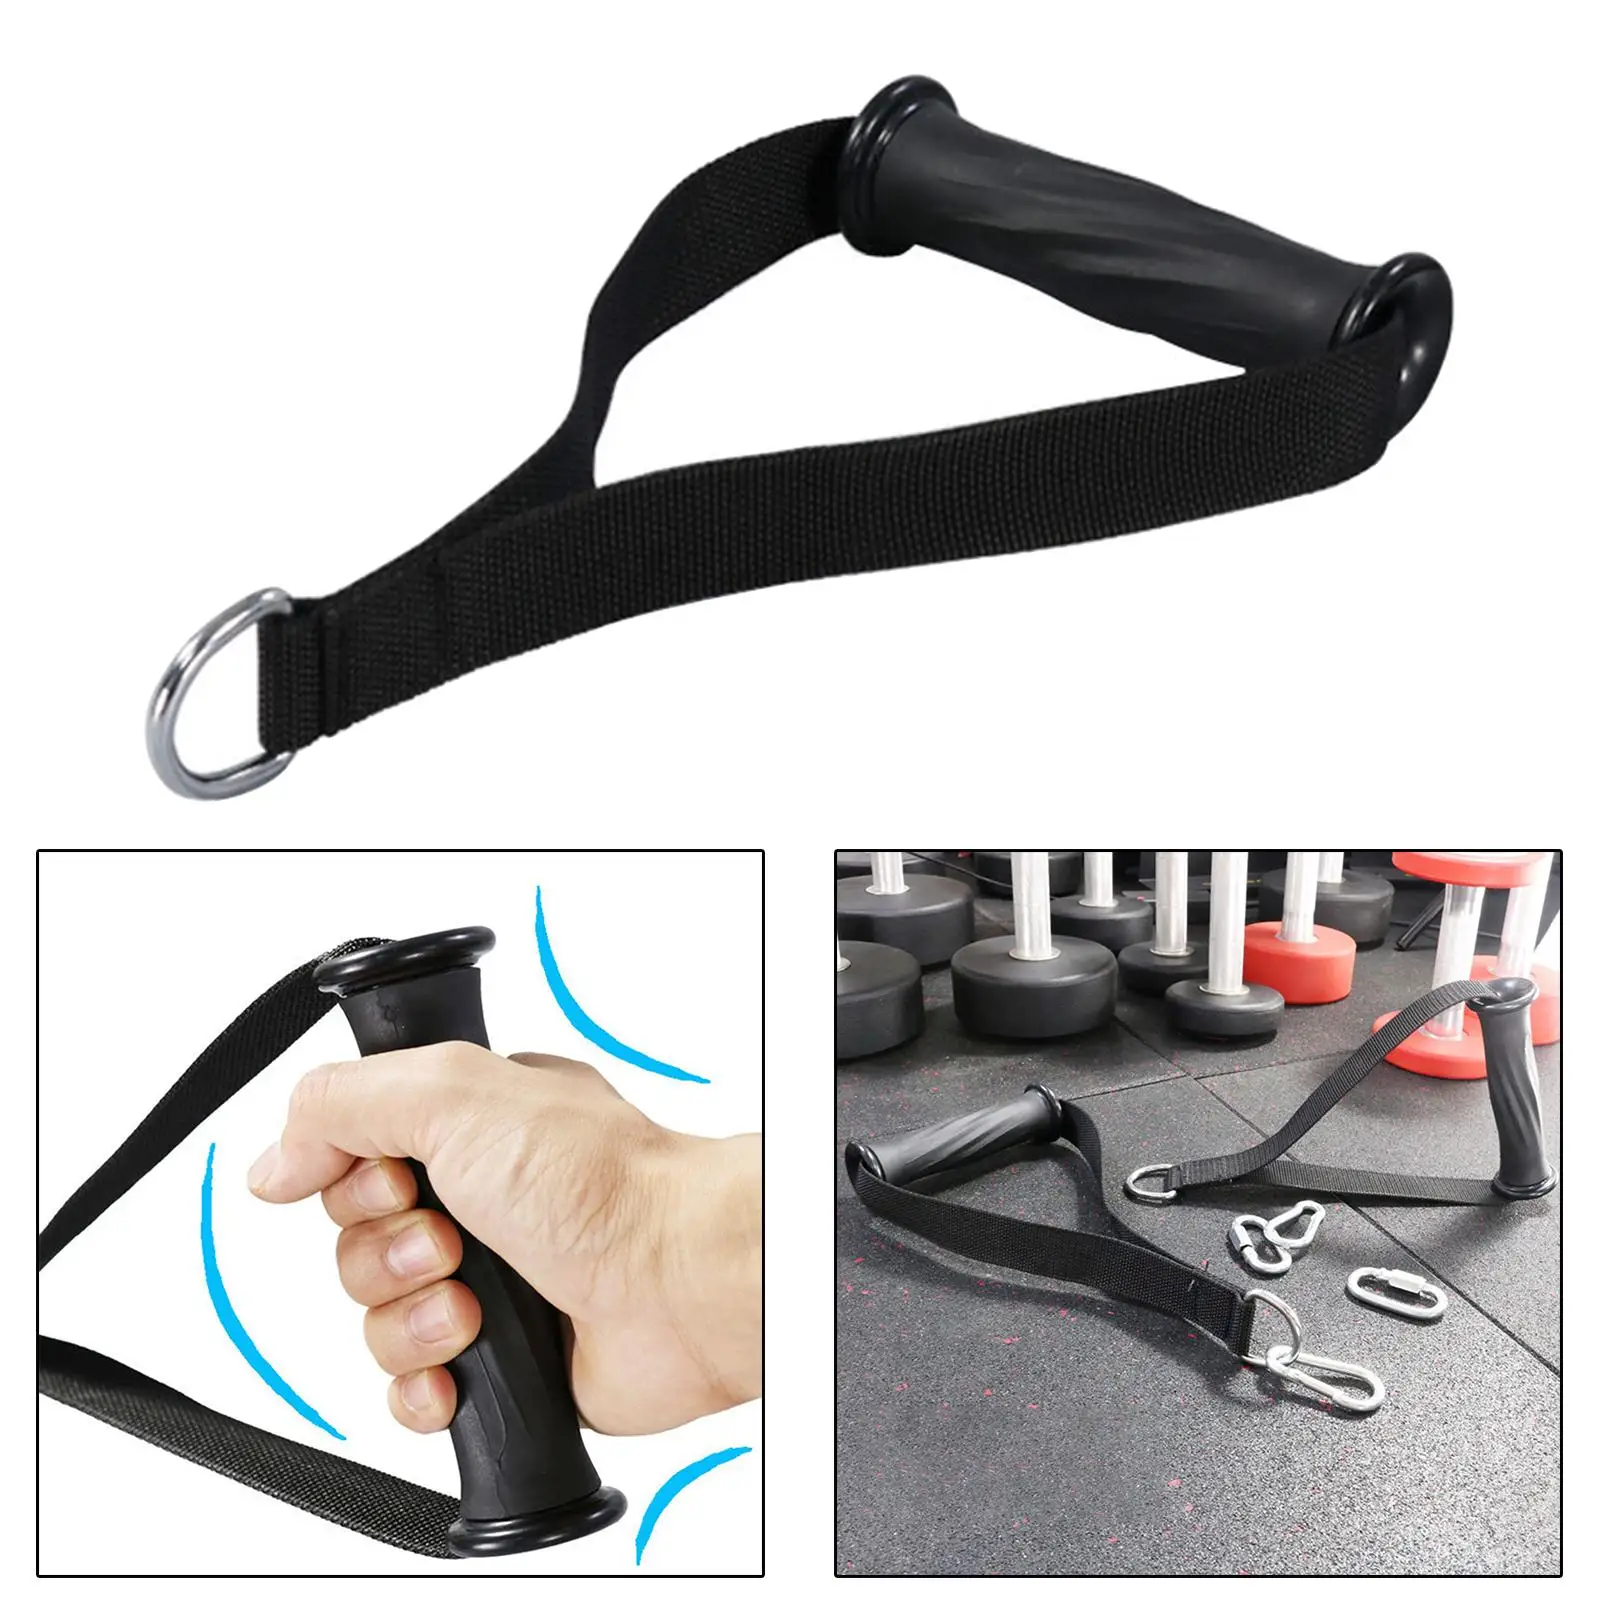 Universal Cable Machine Attachment Handles Exercise Workout Grips Heavy Duty